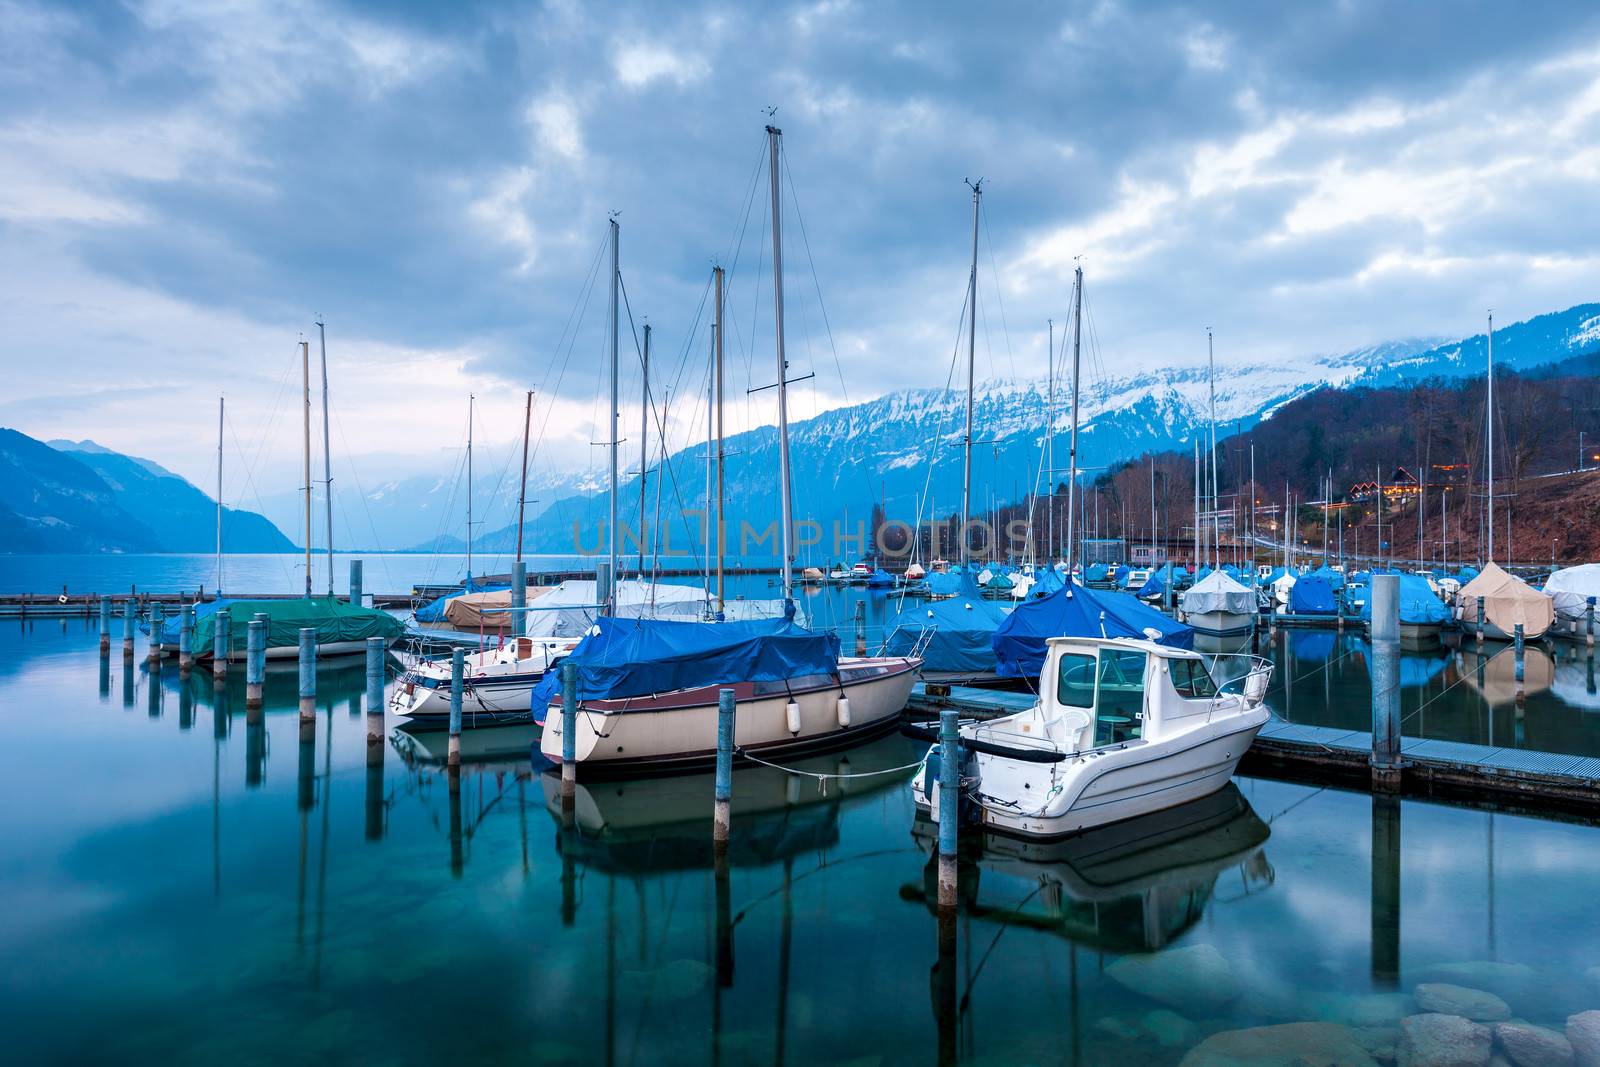  	
Yachts and boats on Lake Thun in the Bernese Oberland, Switzerland